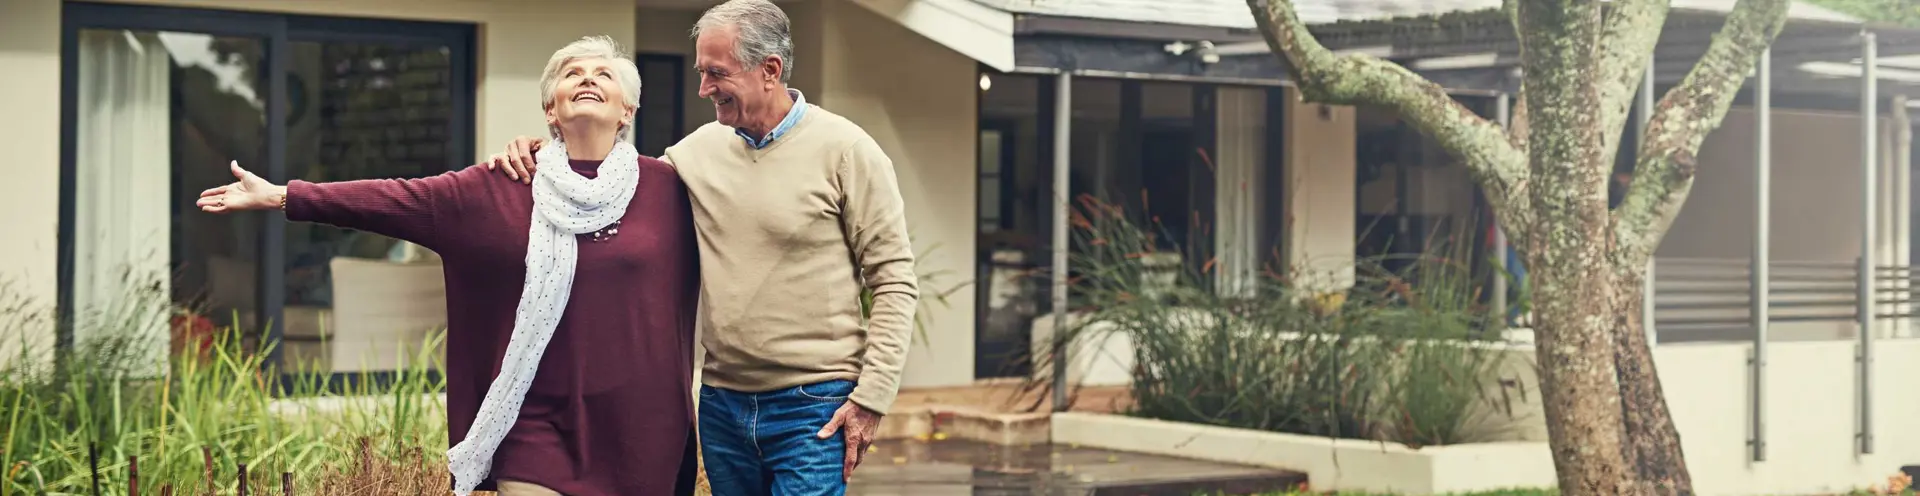 Residential Mortgages - Home Loans - Senior Couple Outside In Front Yard in the Rain